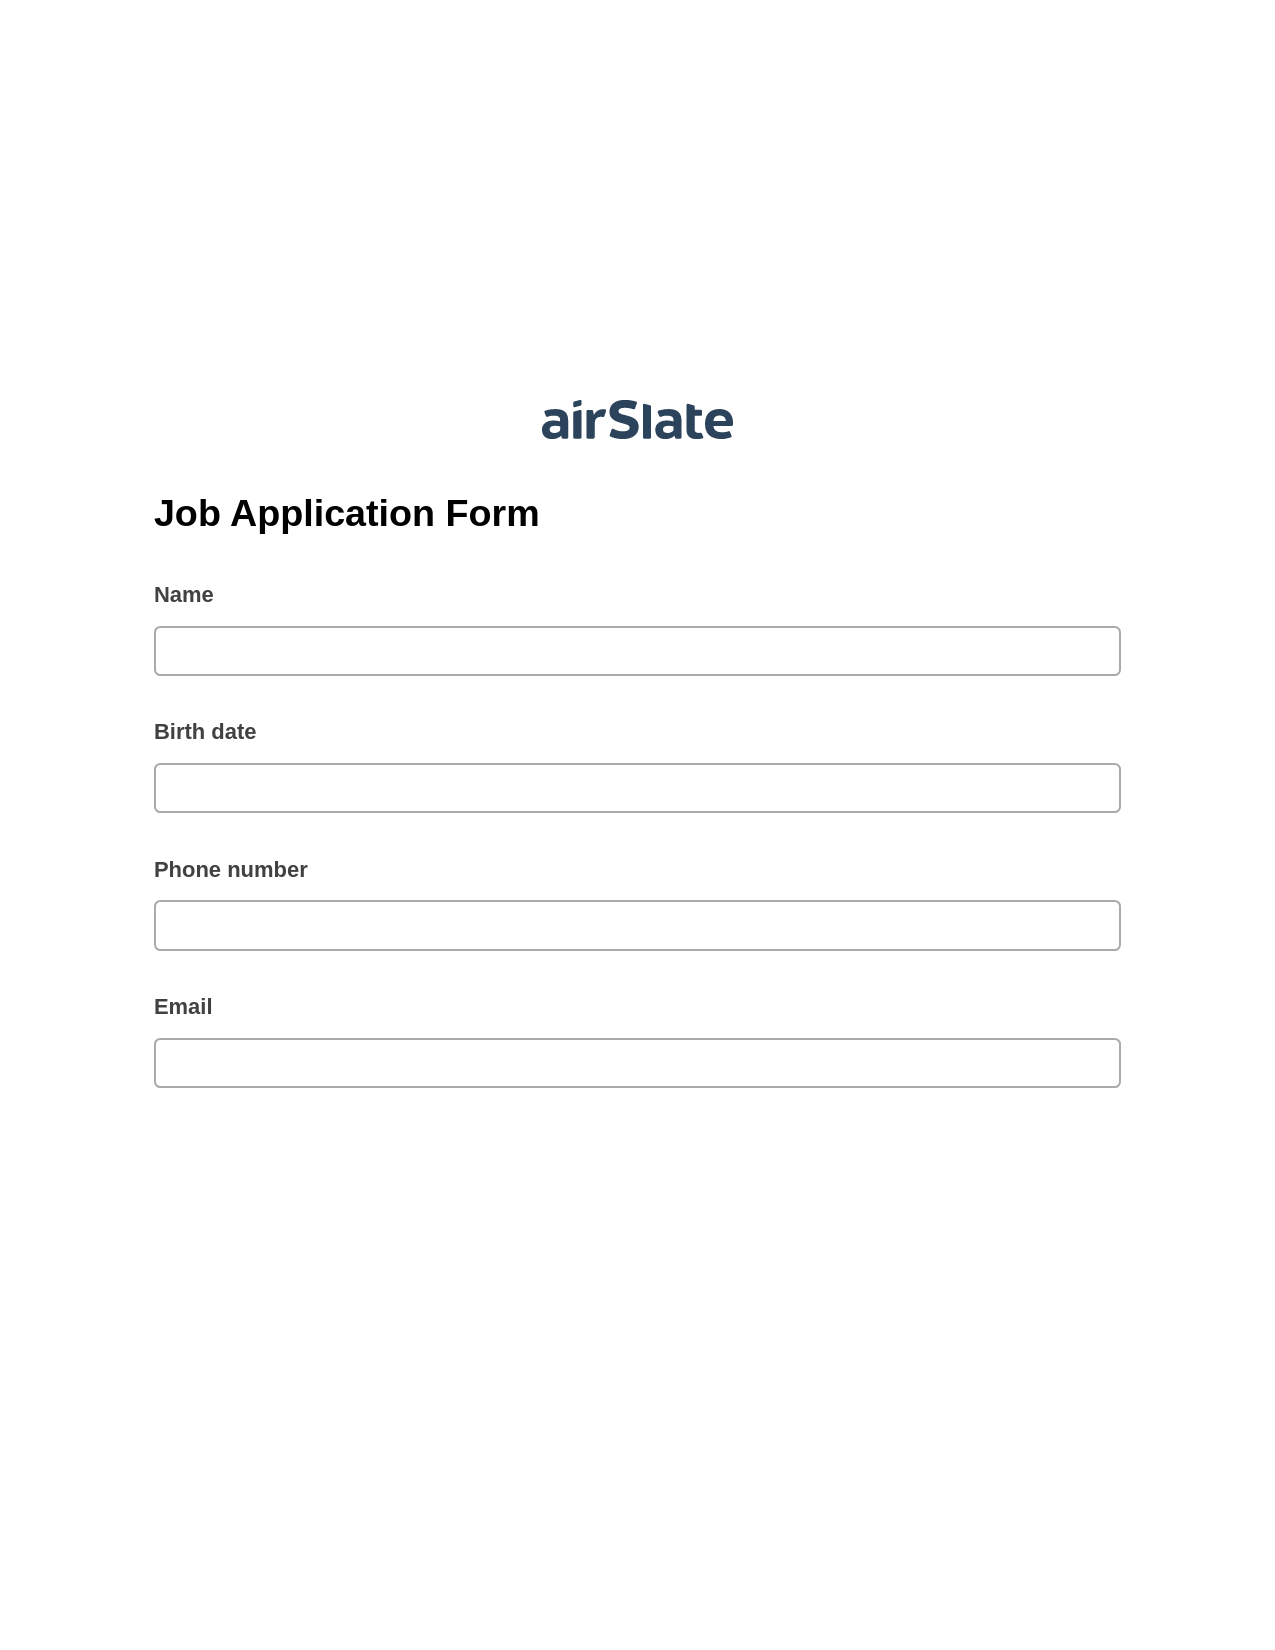 Job Application Form Pre-fill Slate from MS Dynamics 365 Records Bot, Update MS Dynamics 365 Record Bot, Export to Salesforce Bot